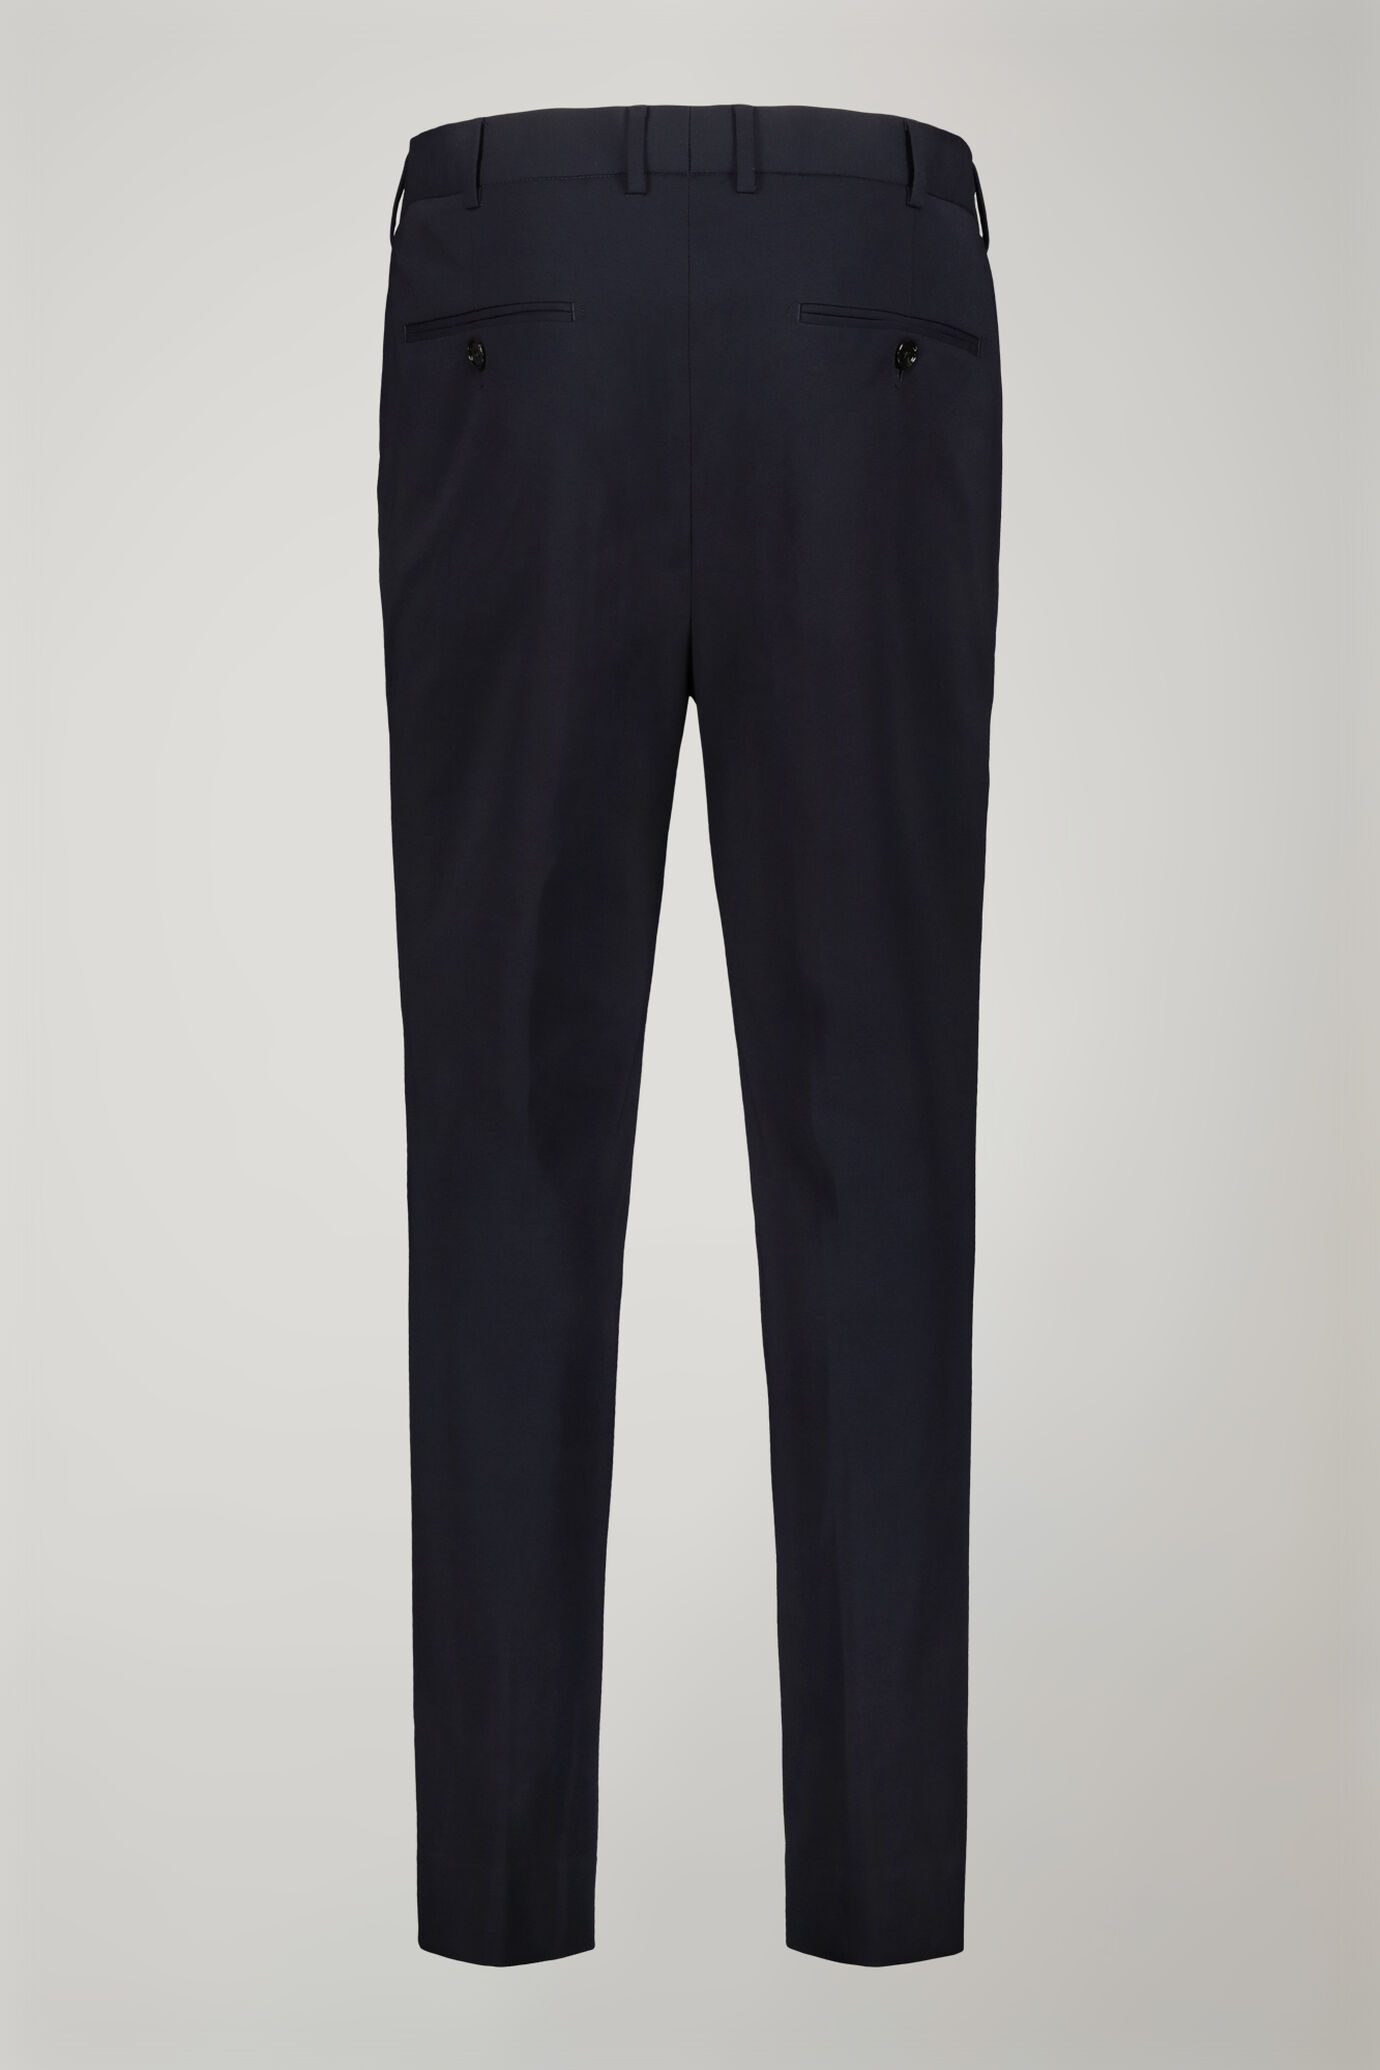 Men’s trousers in jersey without pleats with classic fold regular fit image number 5